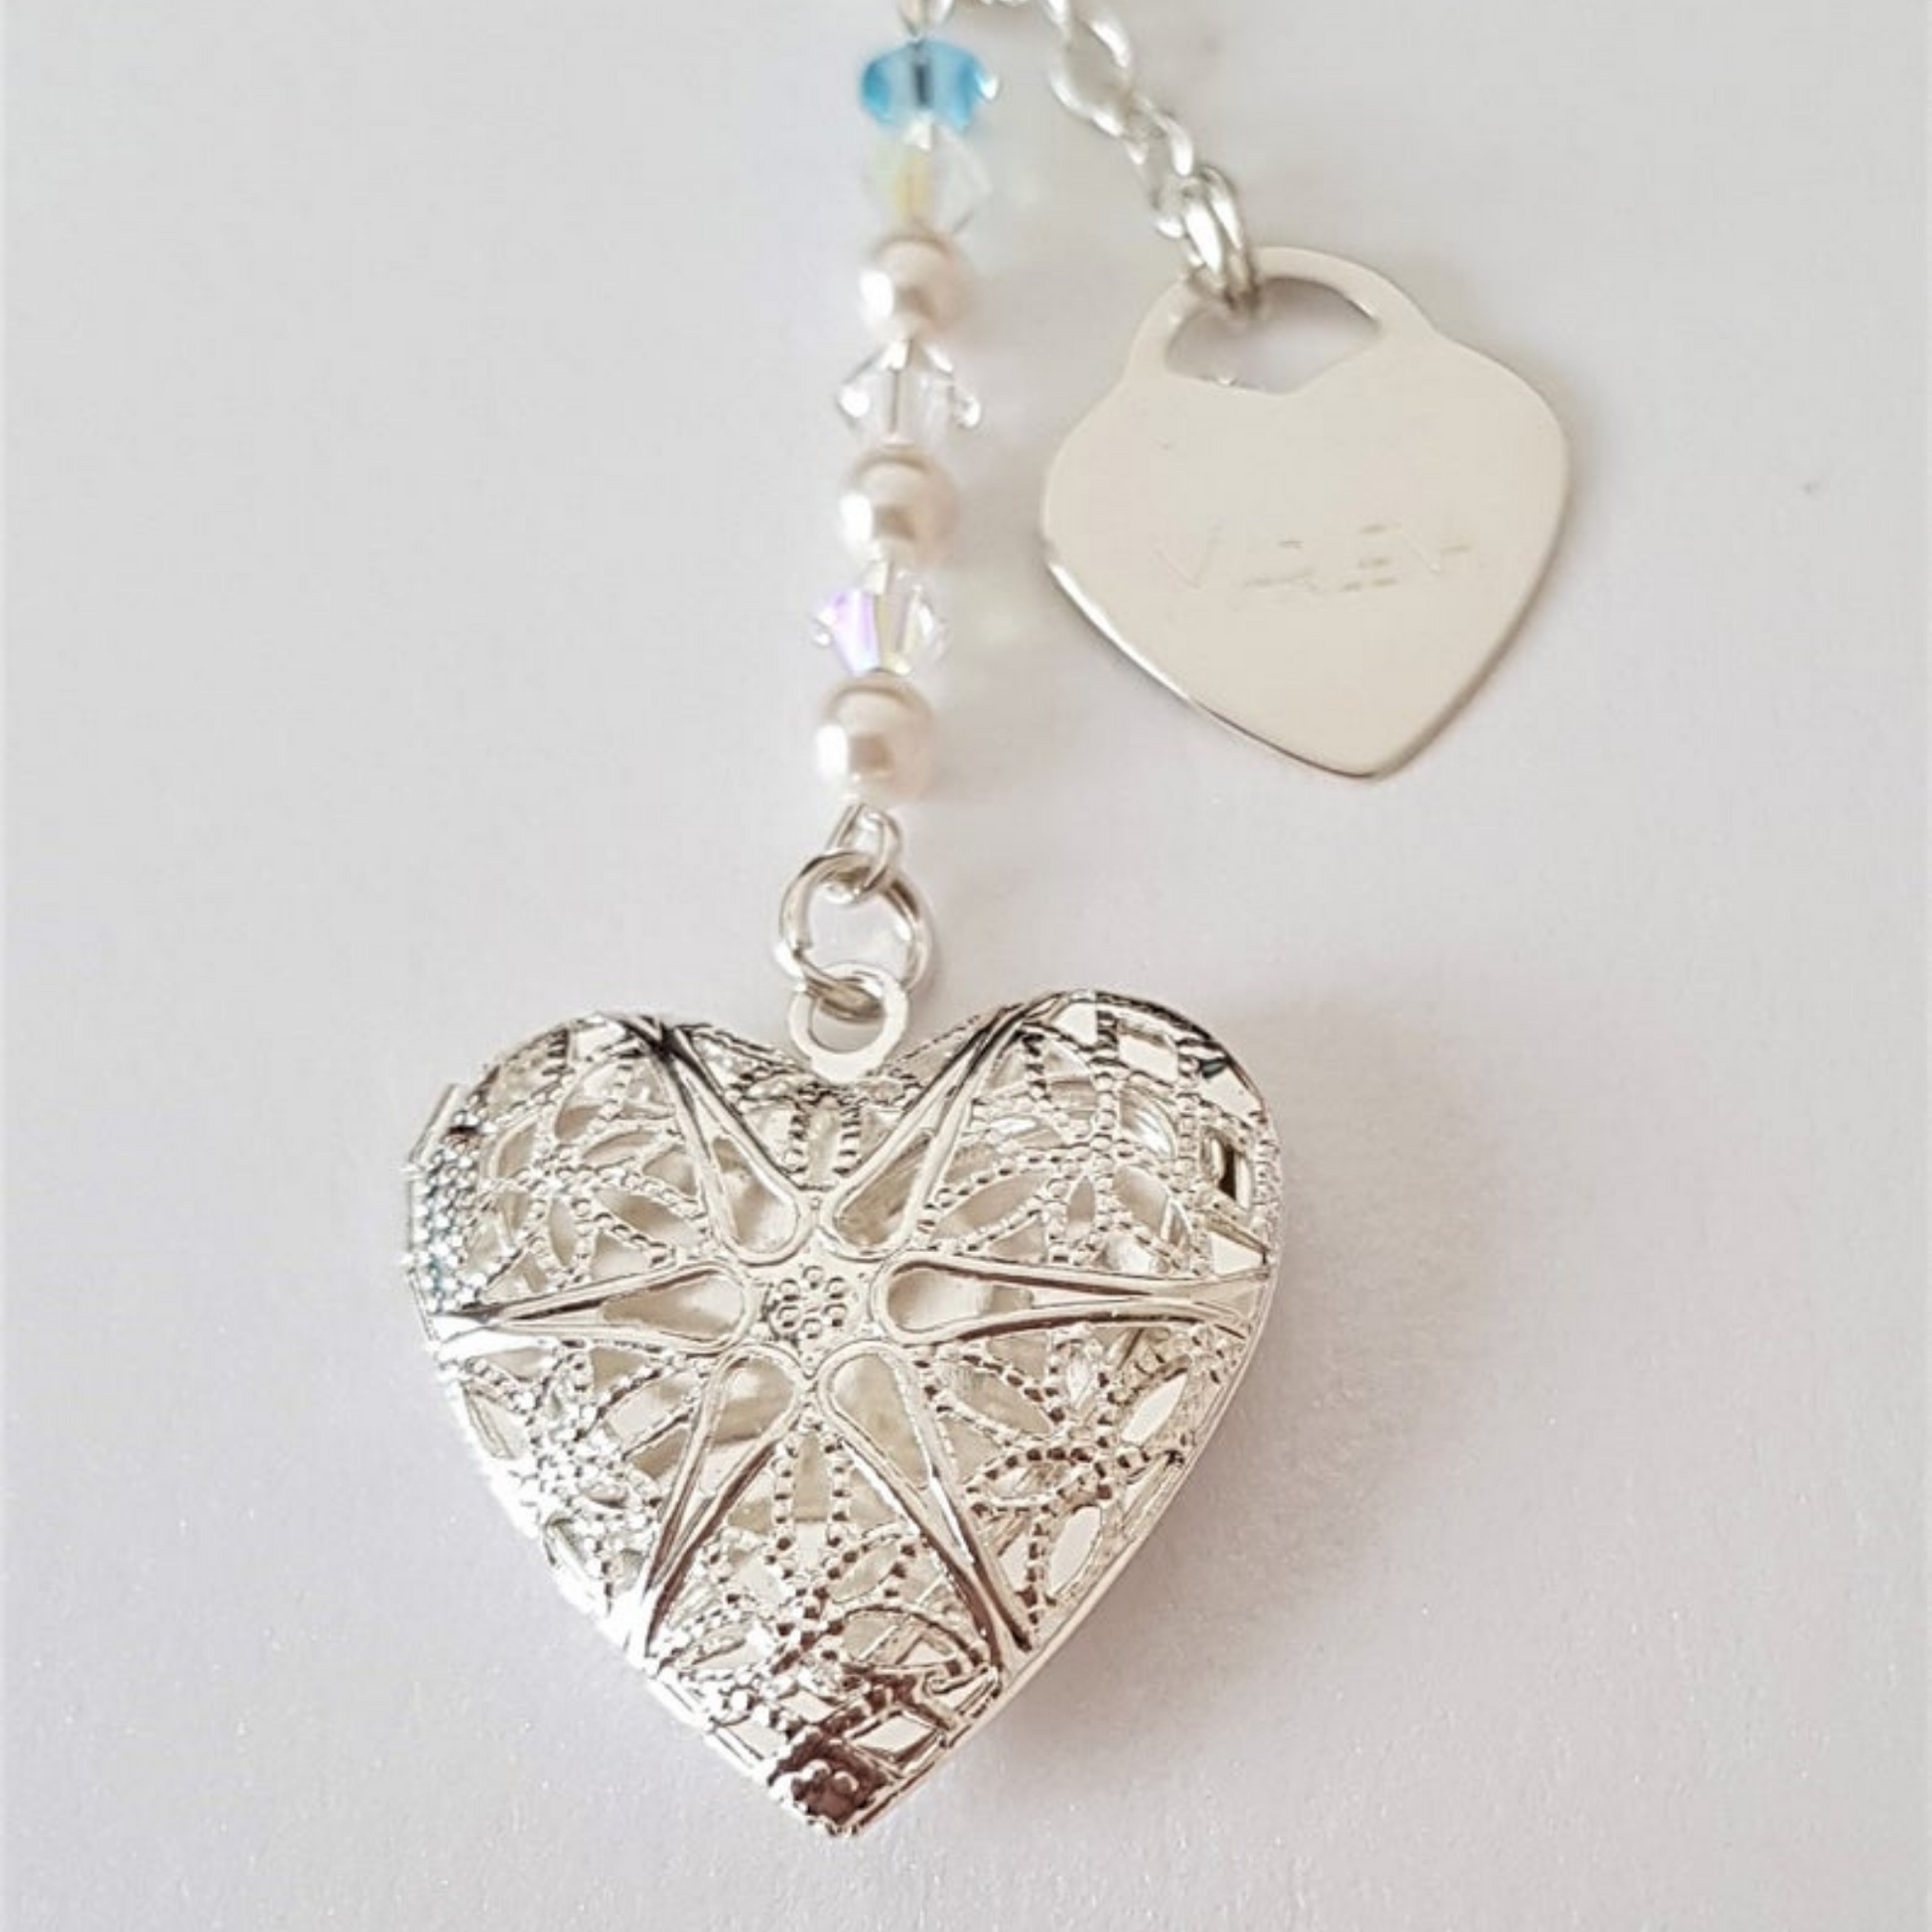 close up of wedding bouquet memorial charm. Showing filigree heart, glass pearls and crystals, a tiny something blue crystal and a sterling silver heart engraved with your choice of text.